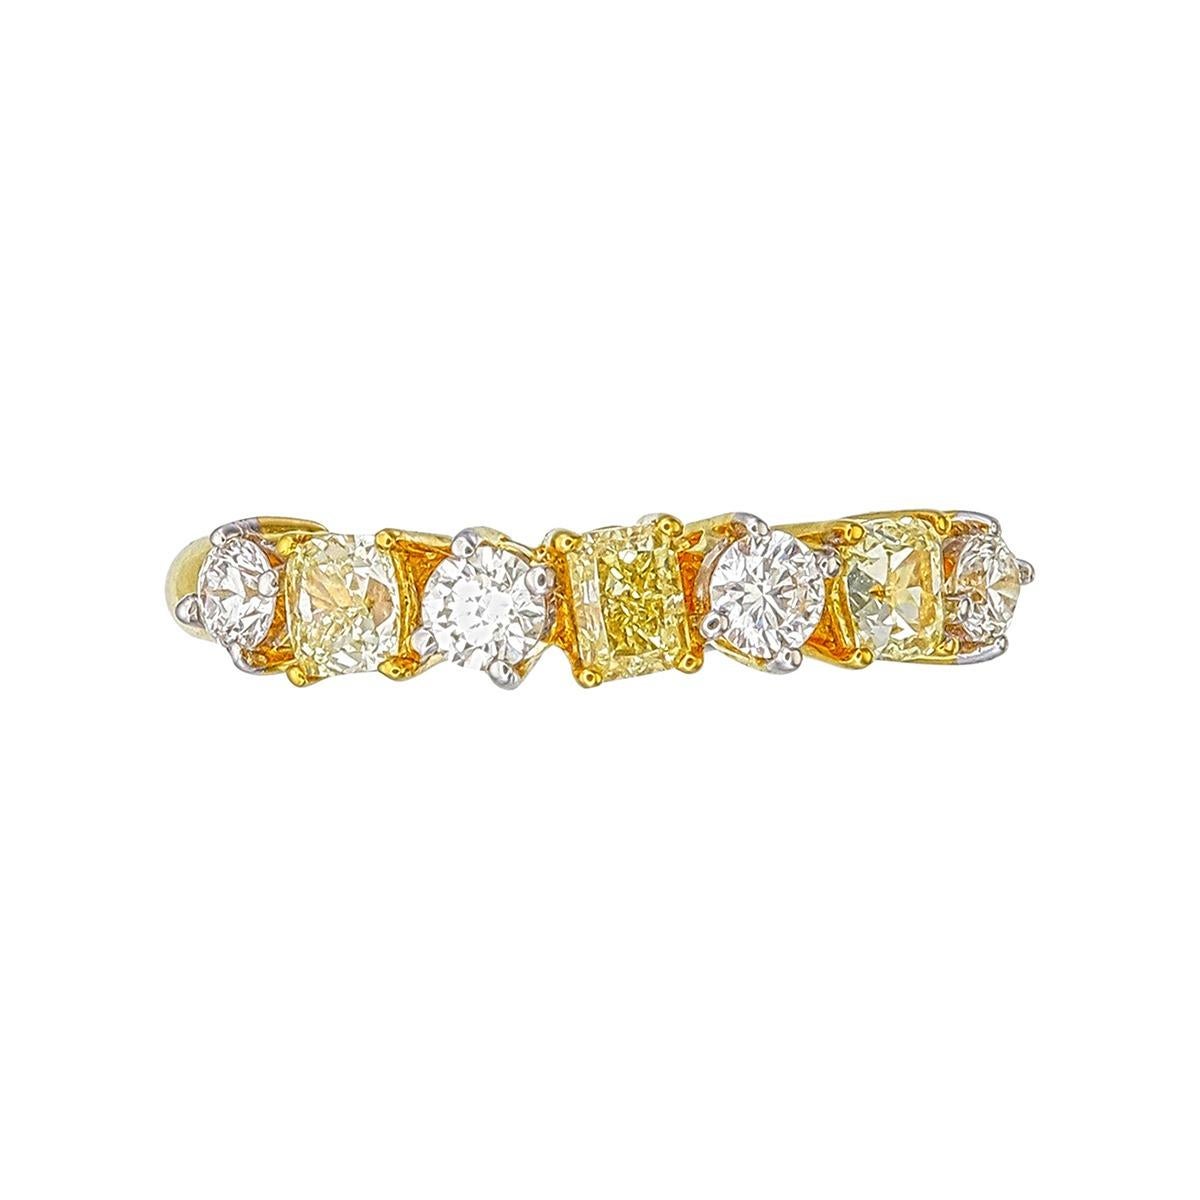 Radiant Cut Diamond Ring For Sale